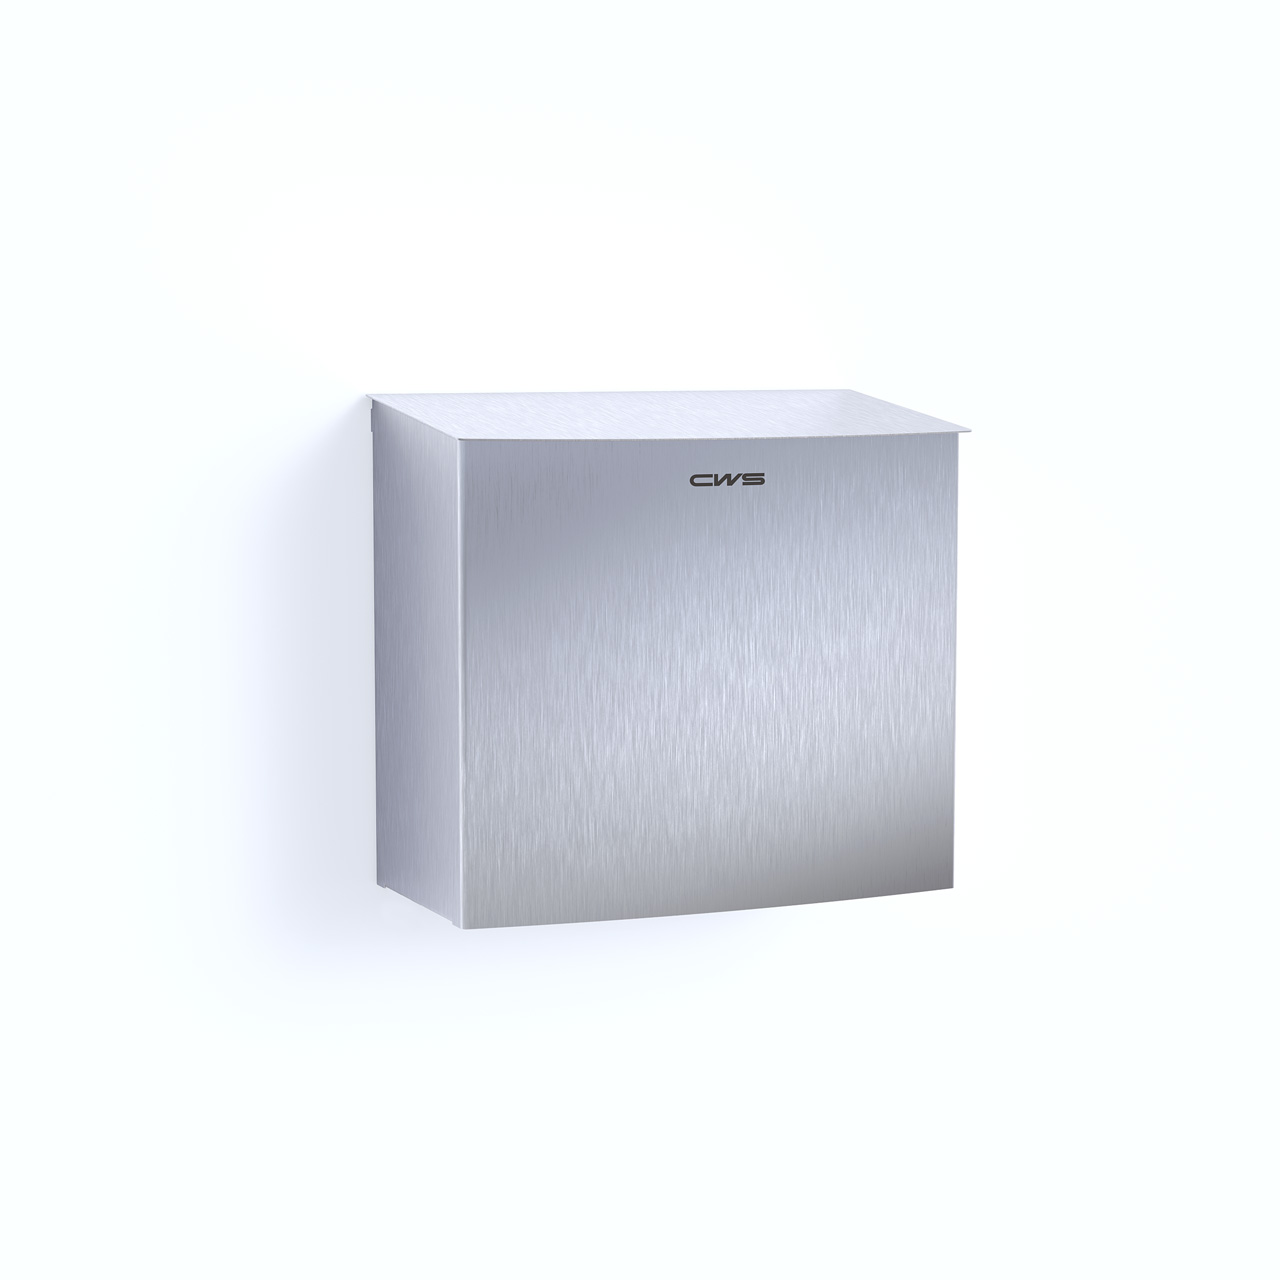  CWS Hygienebox ParadiseLine Stainless Steel  6 L